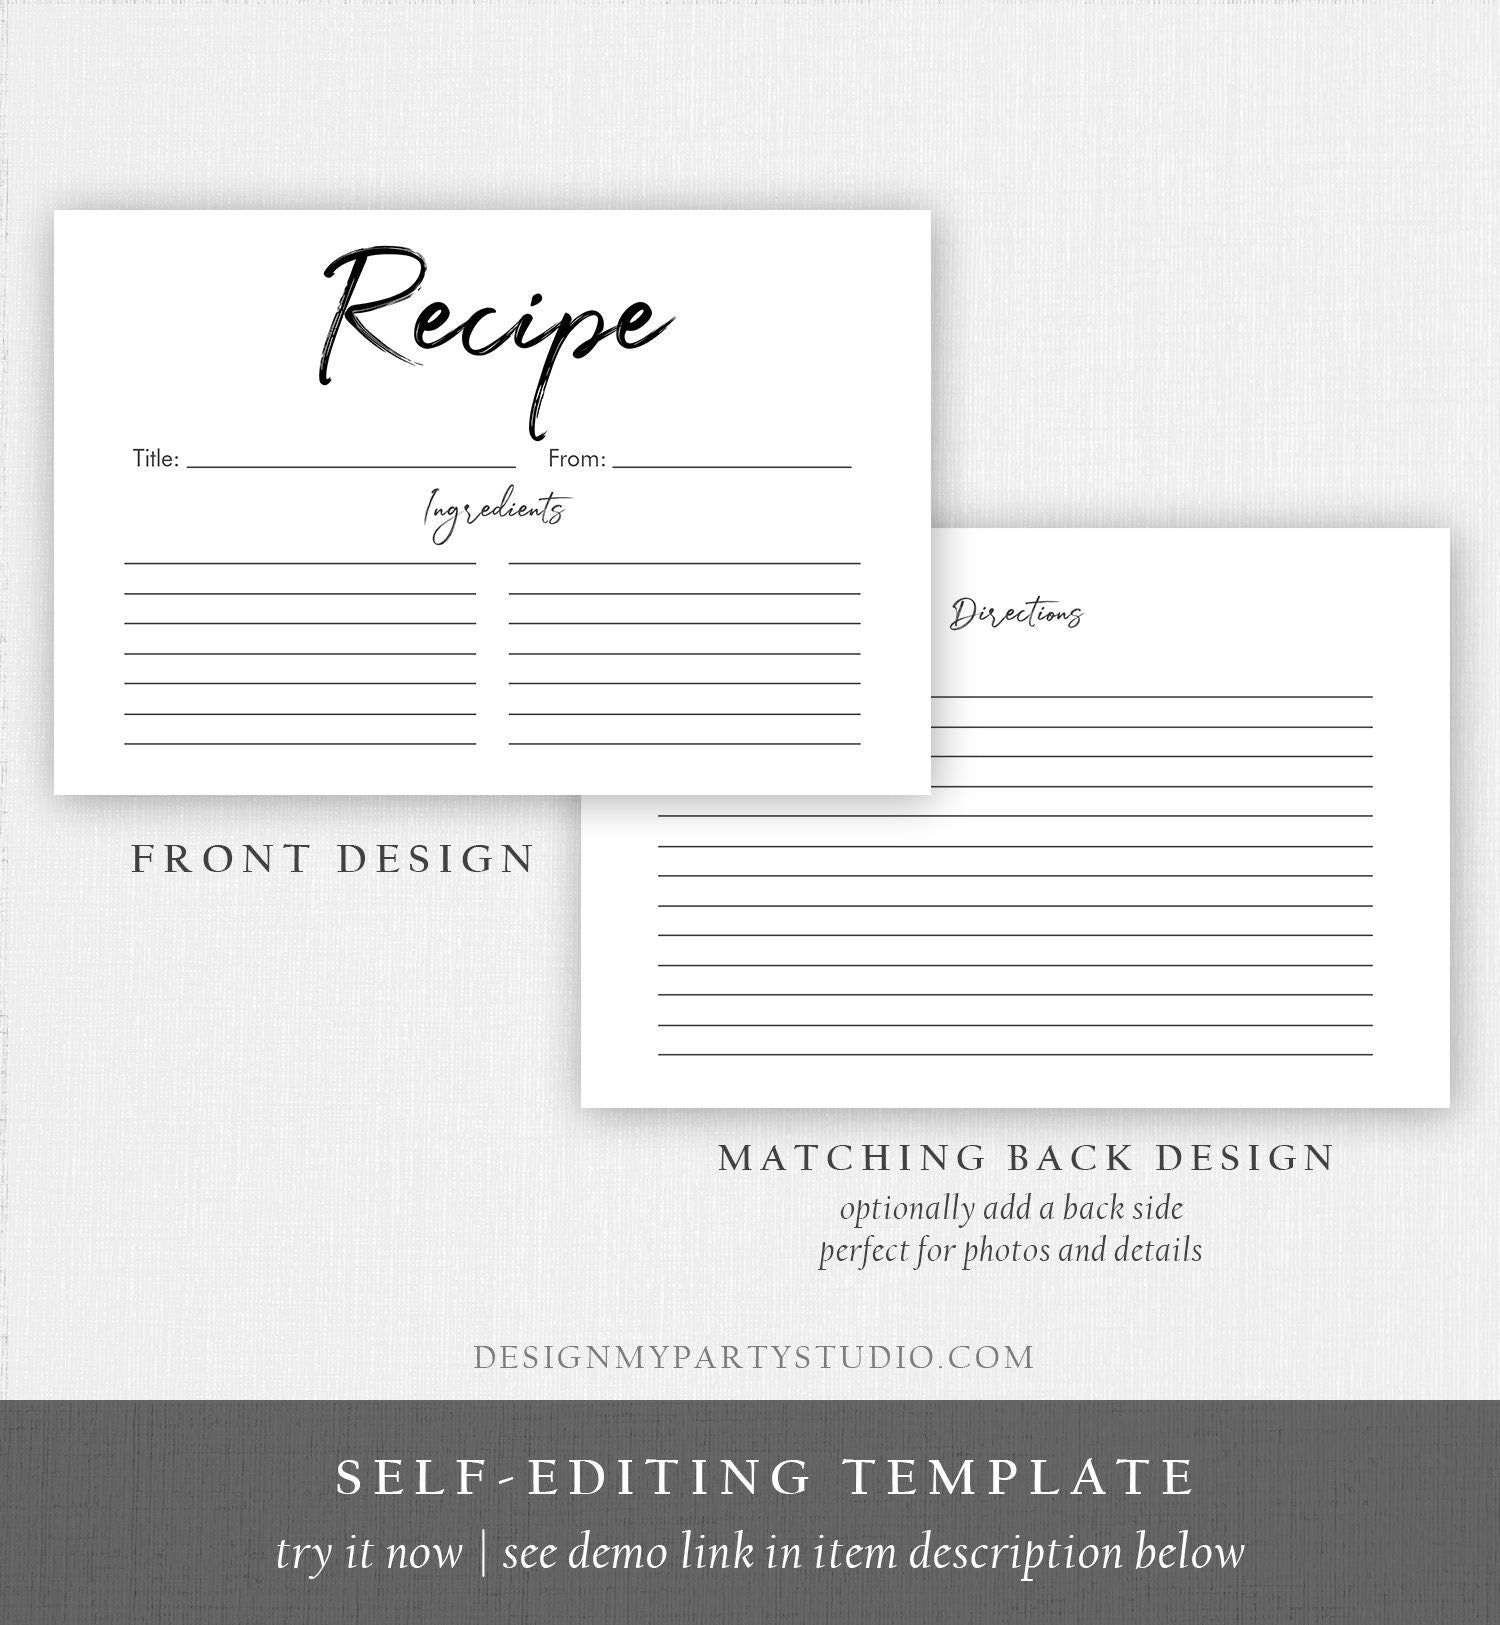 Personalized Recipe Cards, Bridal Shower Recipe Cards